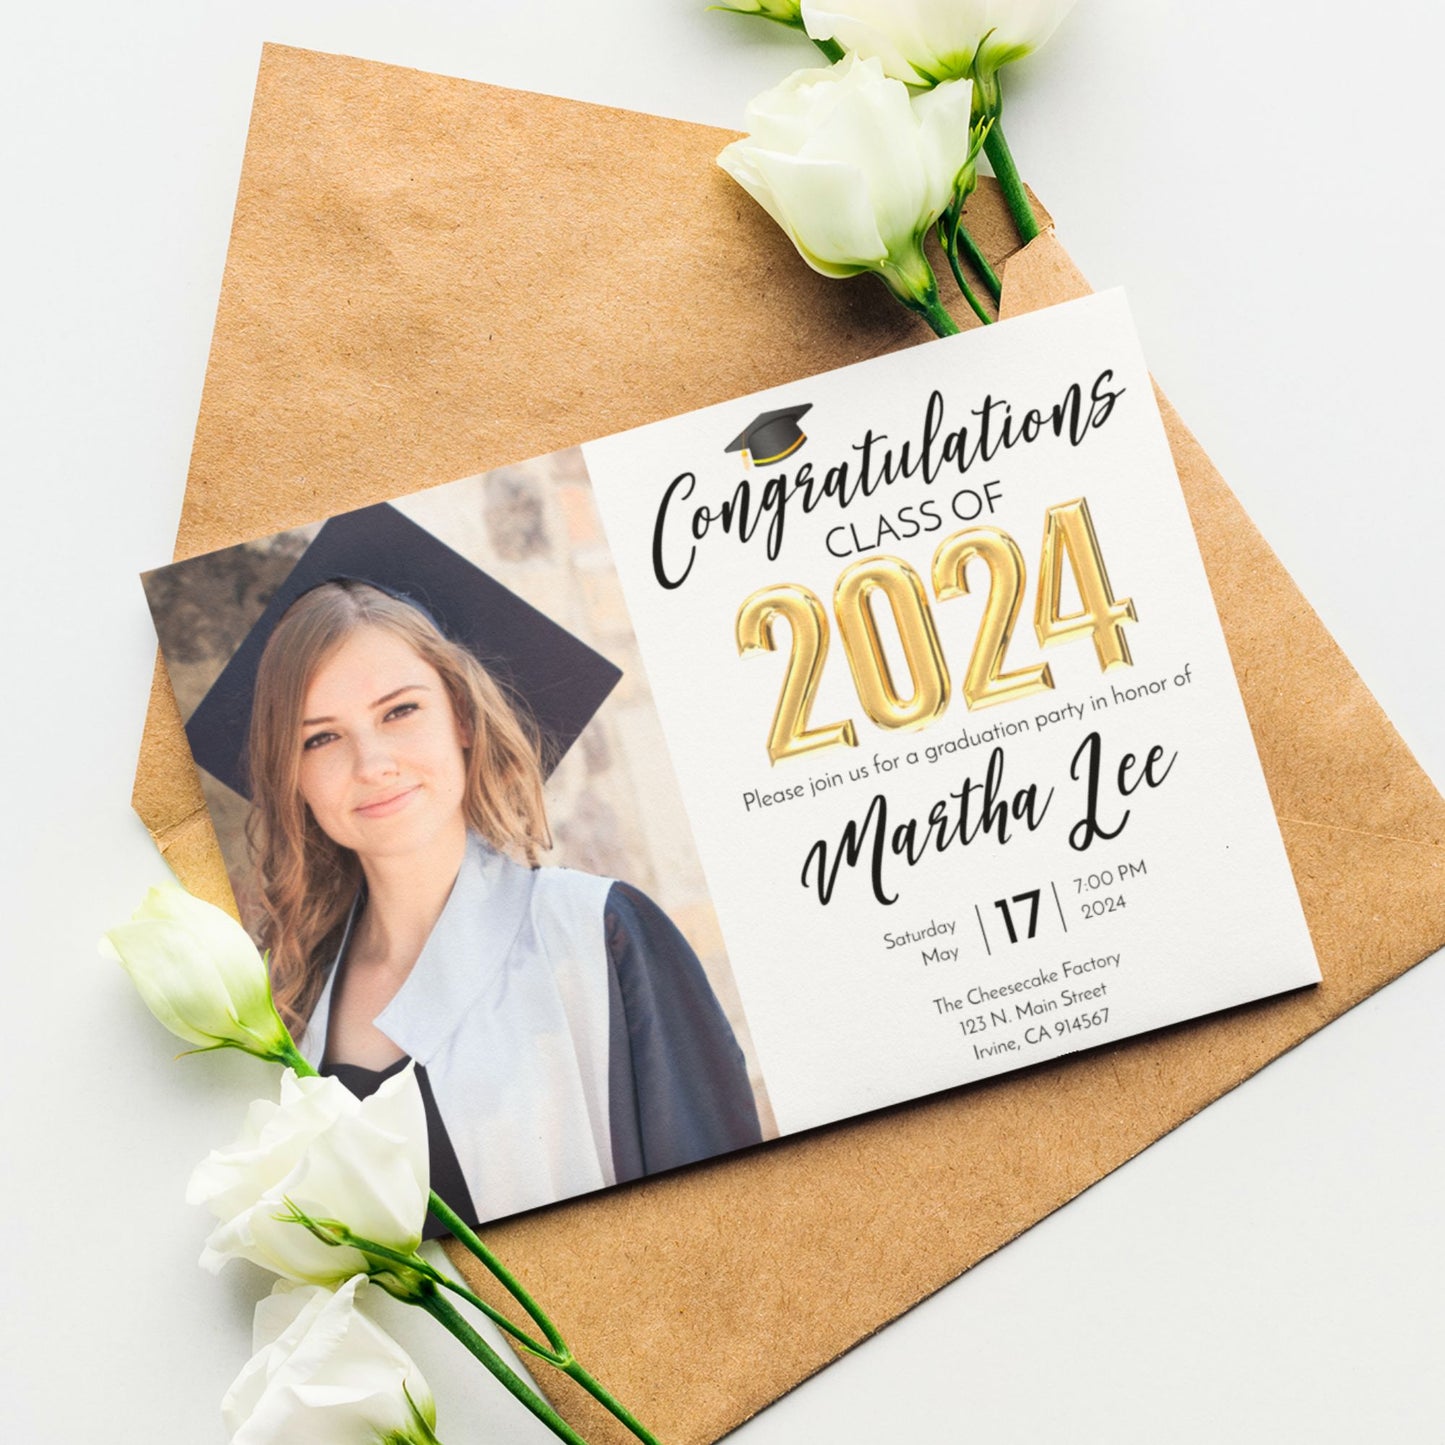 Class of 2024 Graduation Invitation Template - Gold and Black